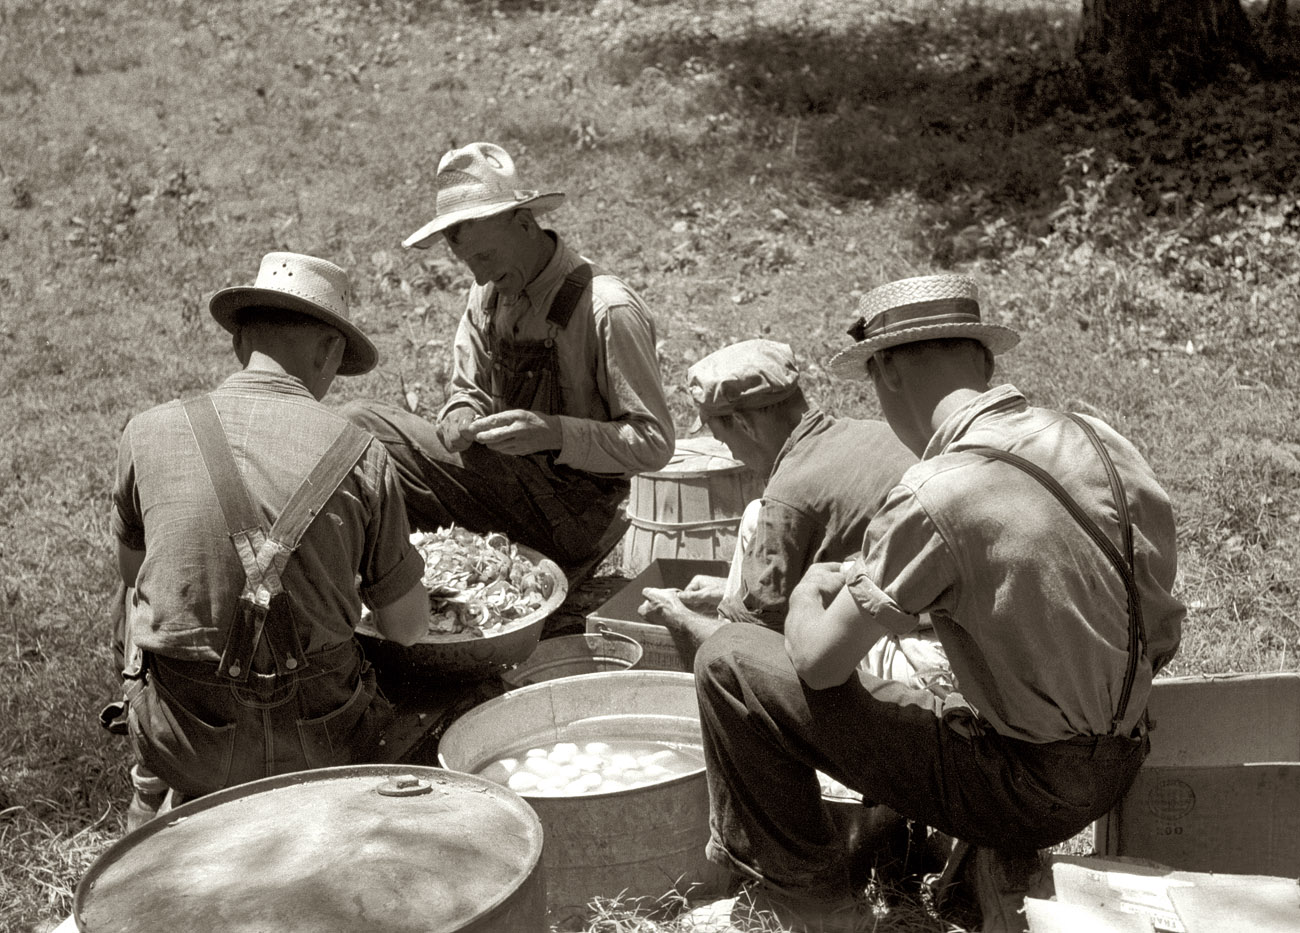 August 1940 near Bardstown, Kentucky. "Parishioners peeling potatoes for a benefit picnic supper on the grounds of St. Thomas Church." View full size. 35mm negative by Marion Post Wolcott for the Farm Security Administration.